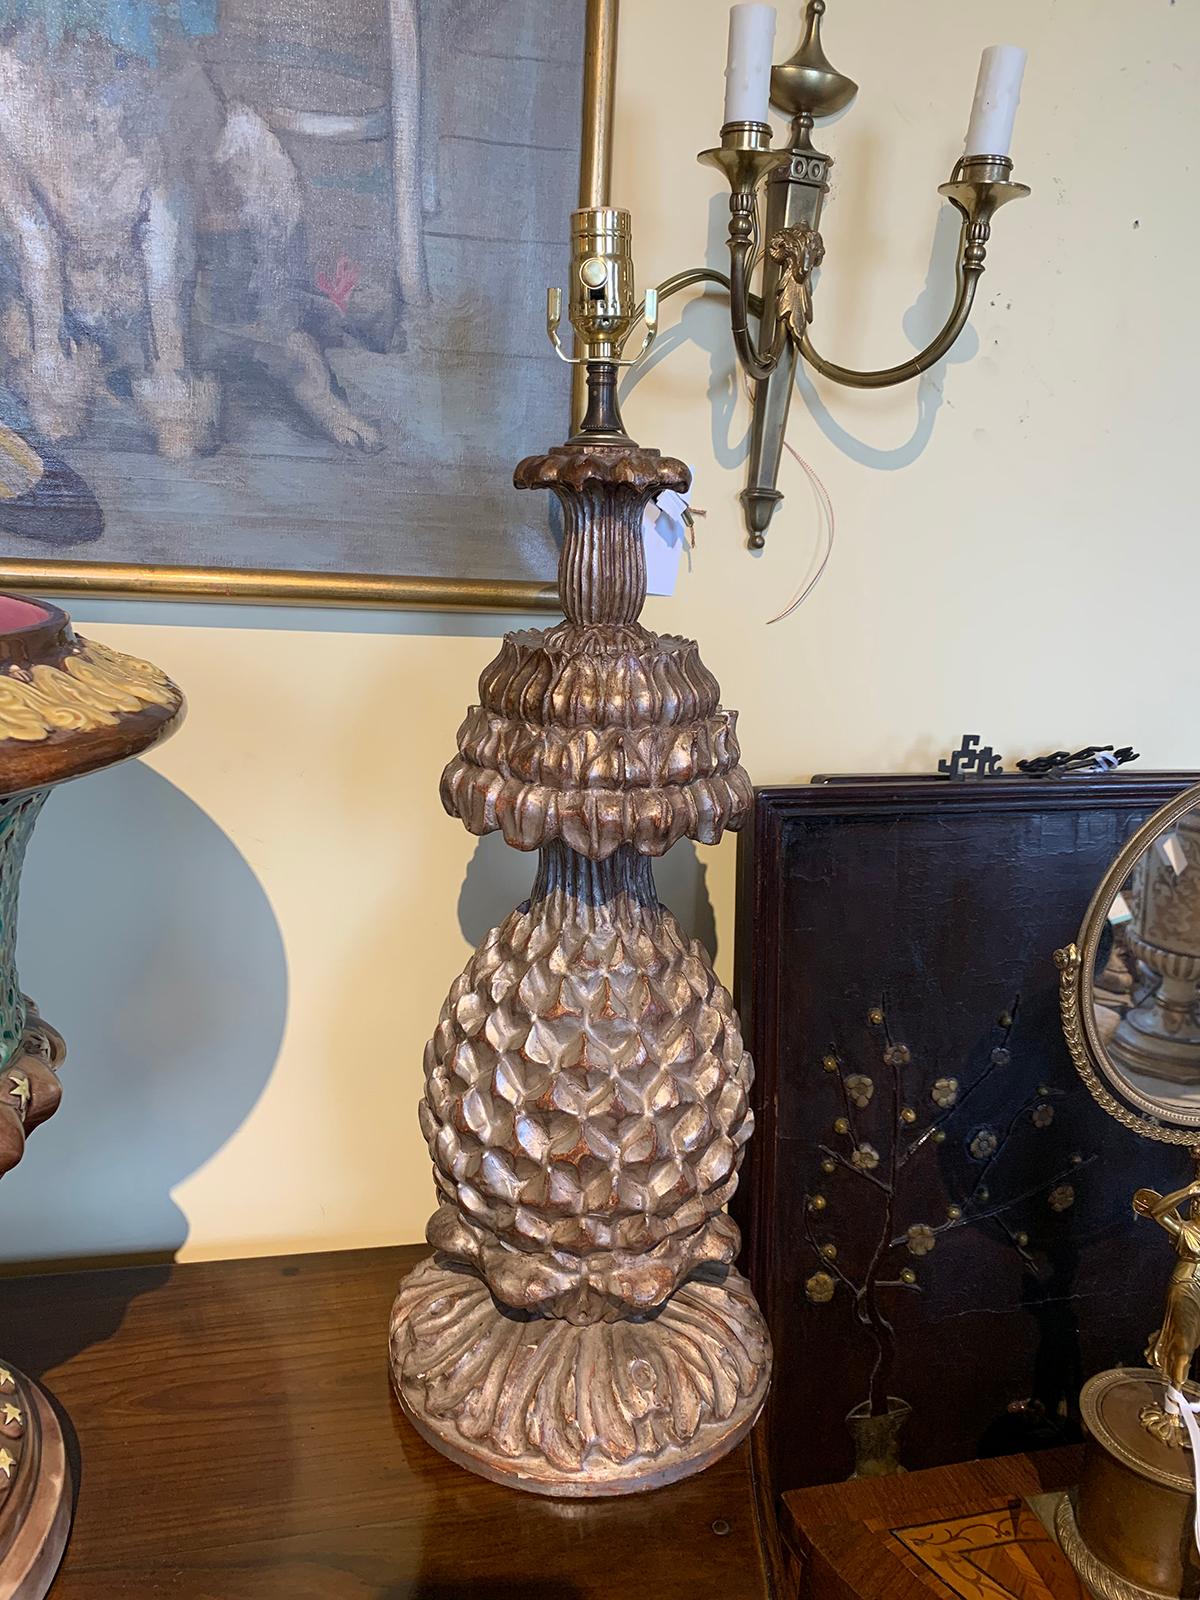 Large mid-20th century silver gilt stylized pineapple lamp.
New wiring.